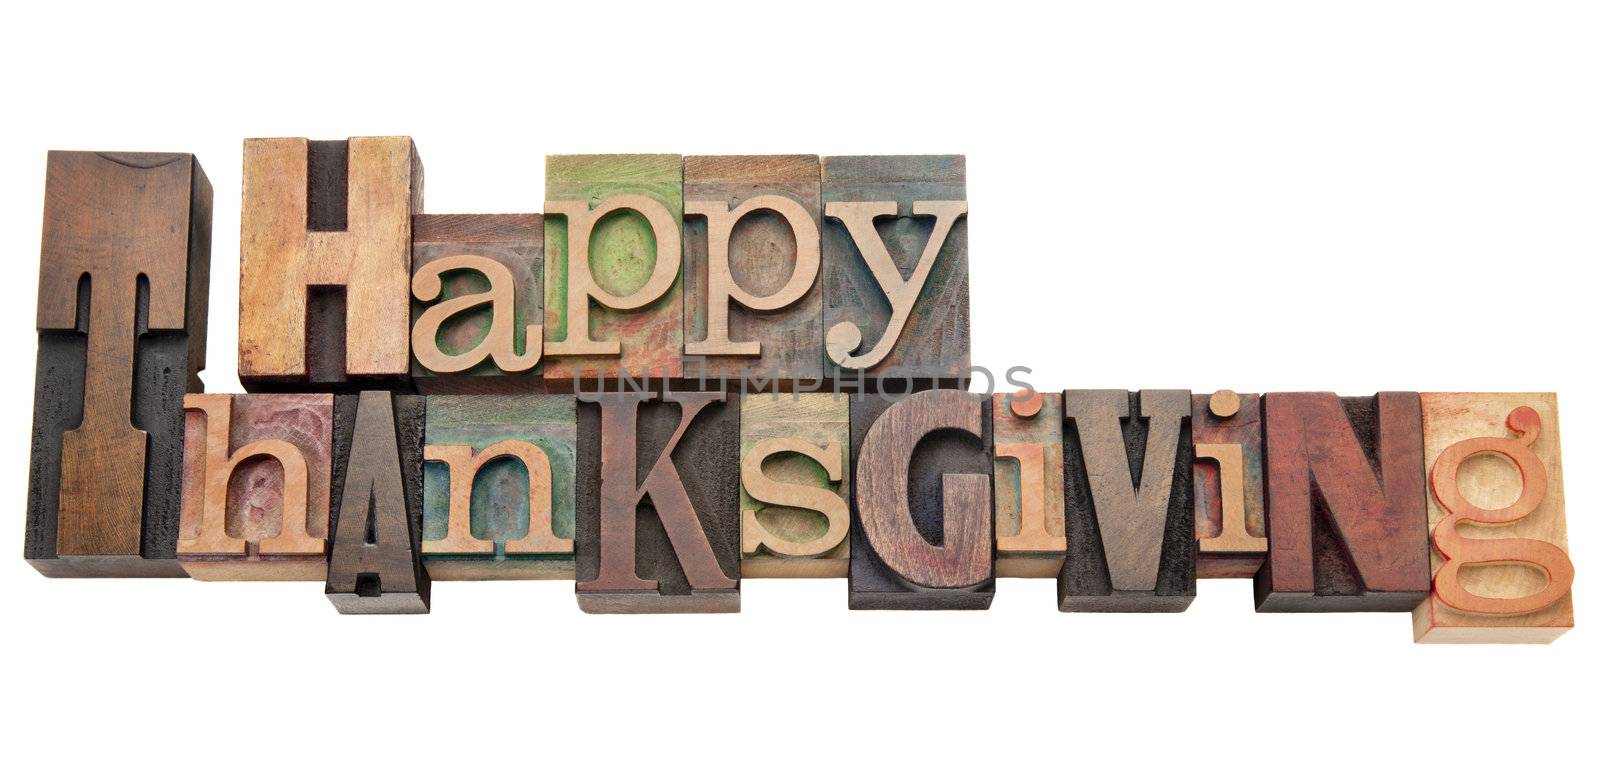 Happy Thanksgiving  - isolated text in vintage wood letterpress printing blocks